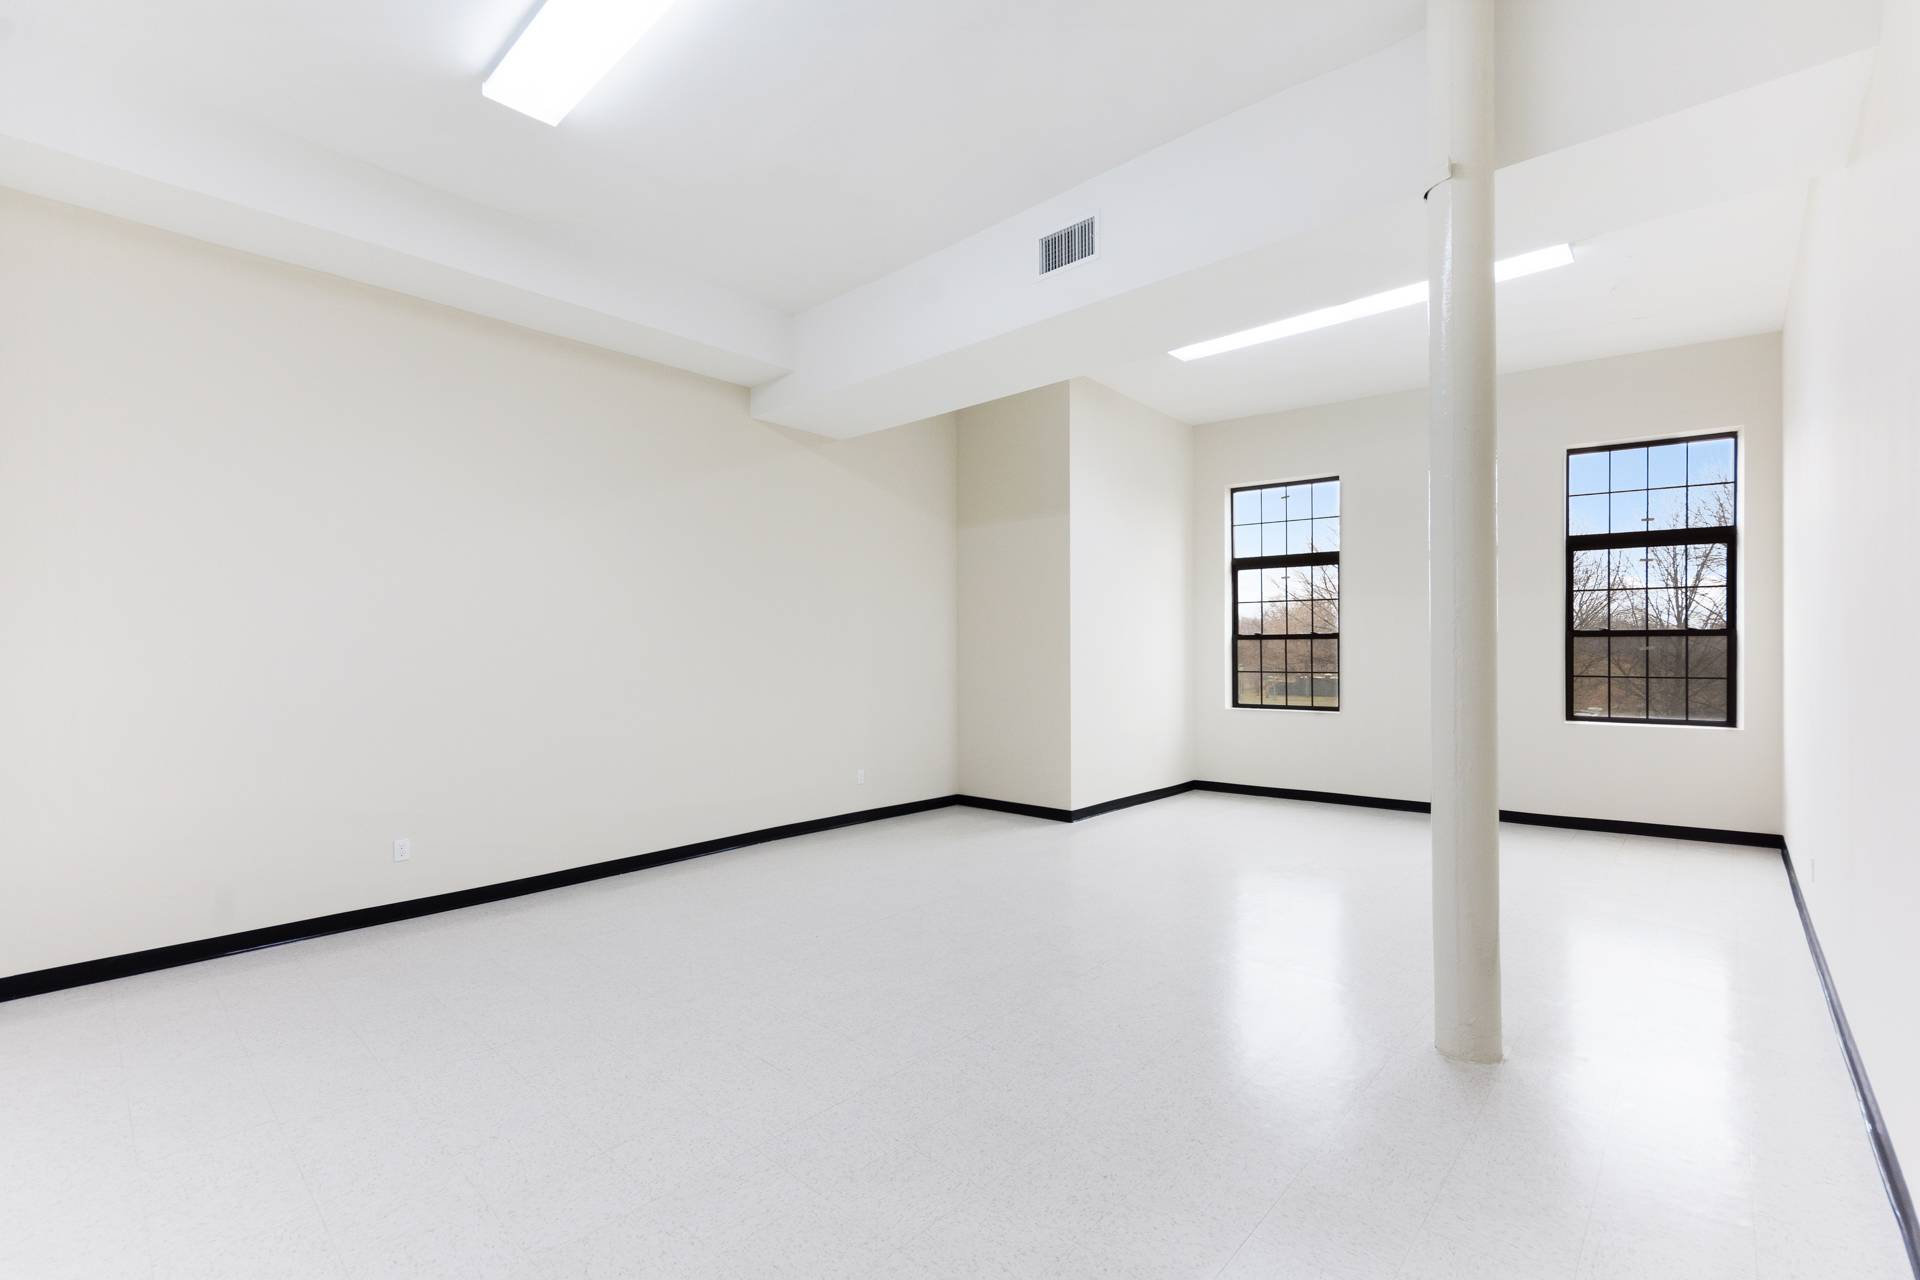 Bronx Commercial Lease: New Office Space in White Box Condition on E. Tremont Ave